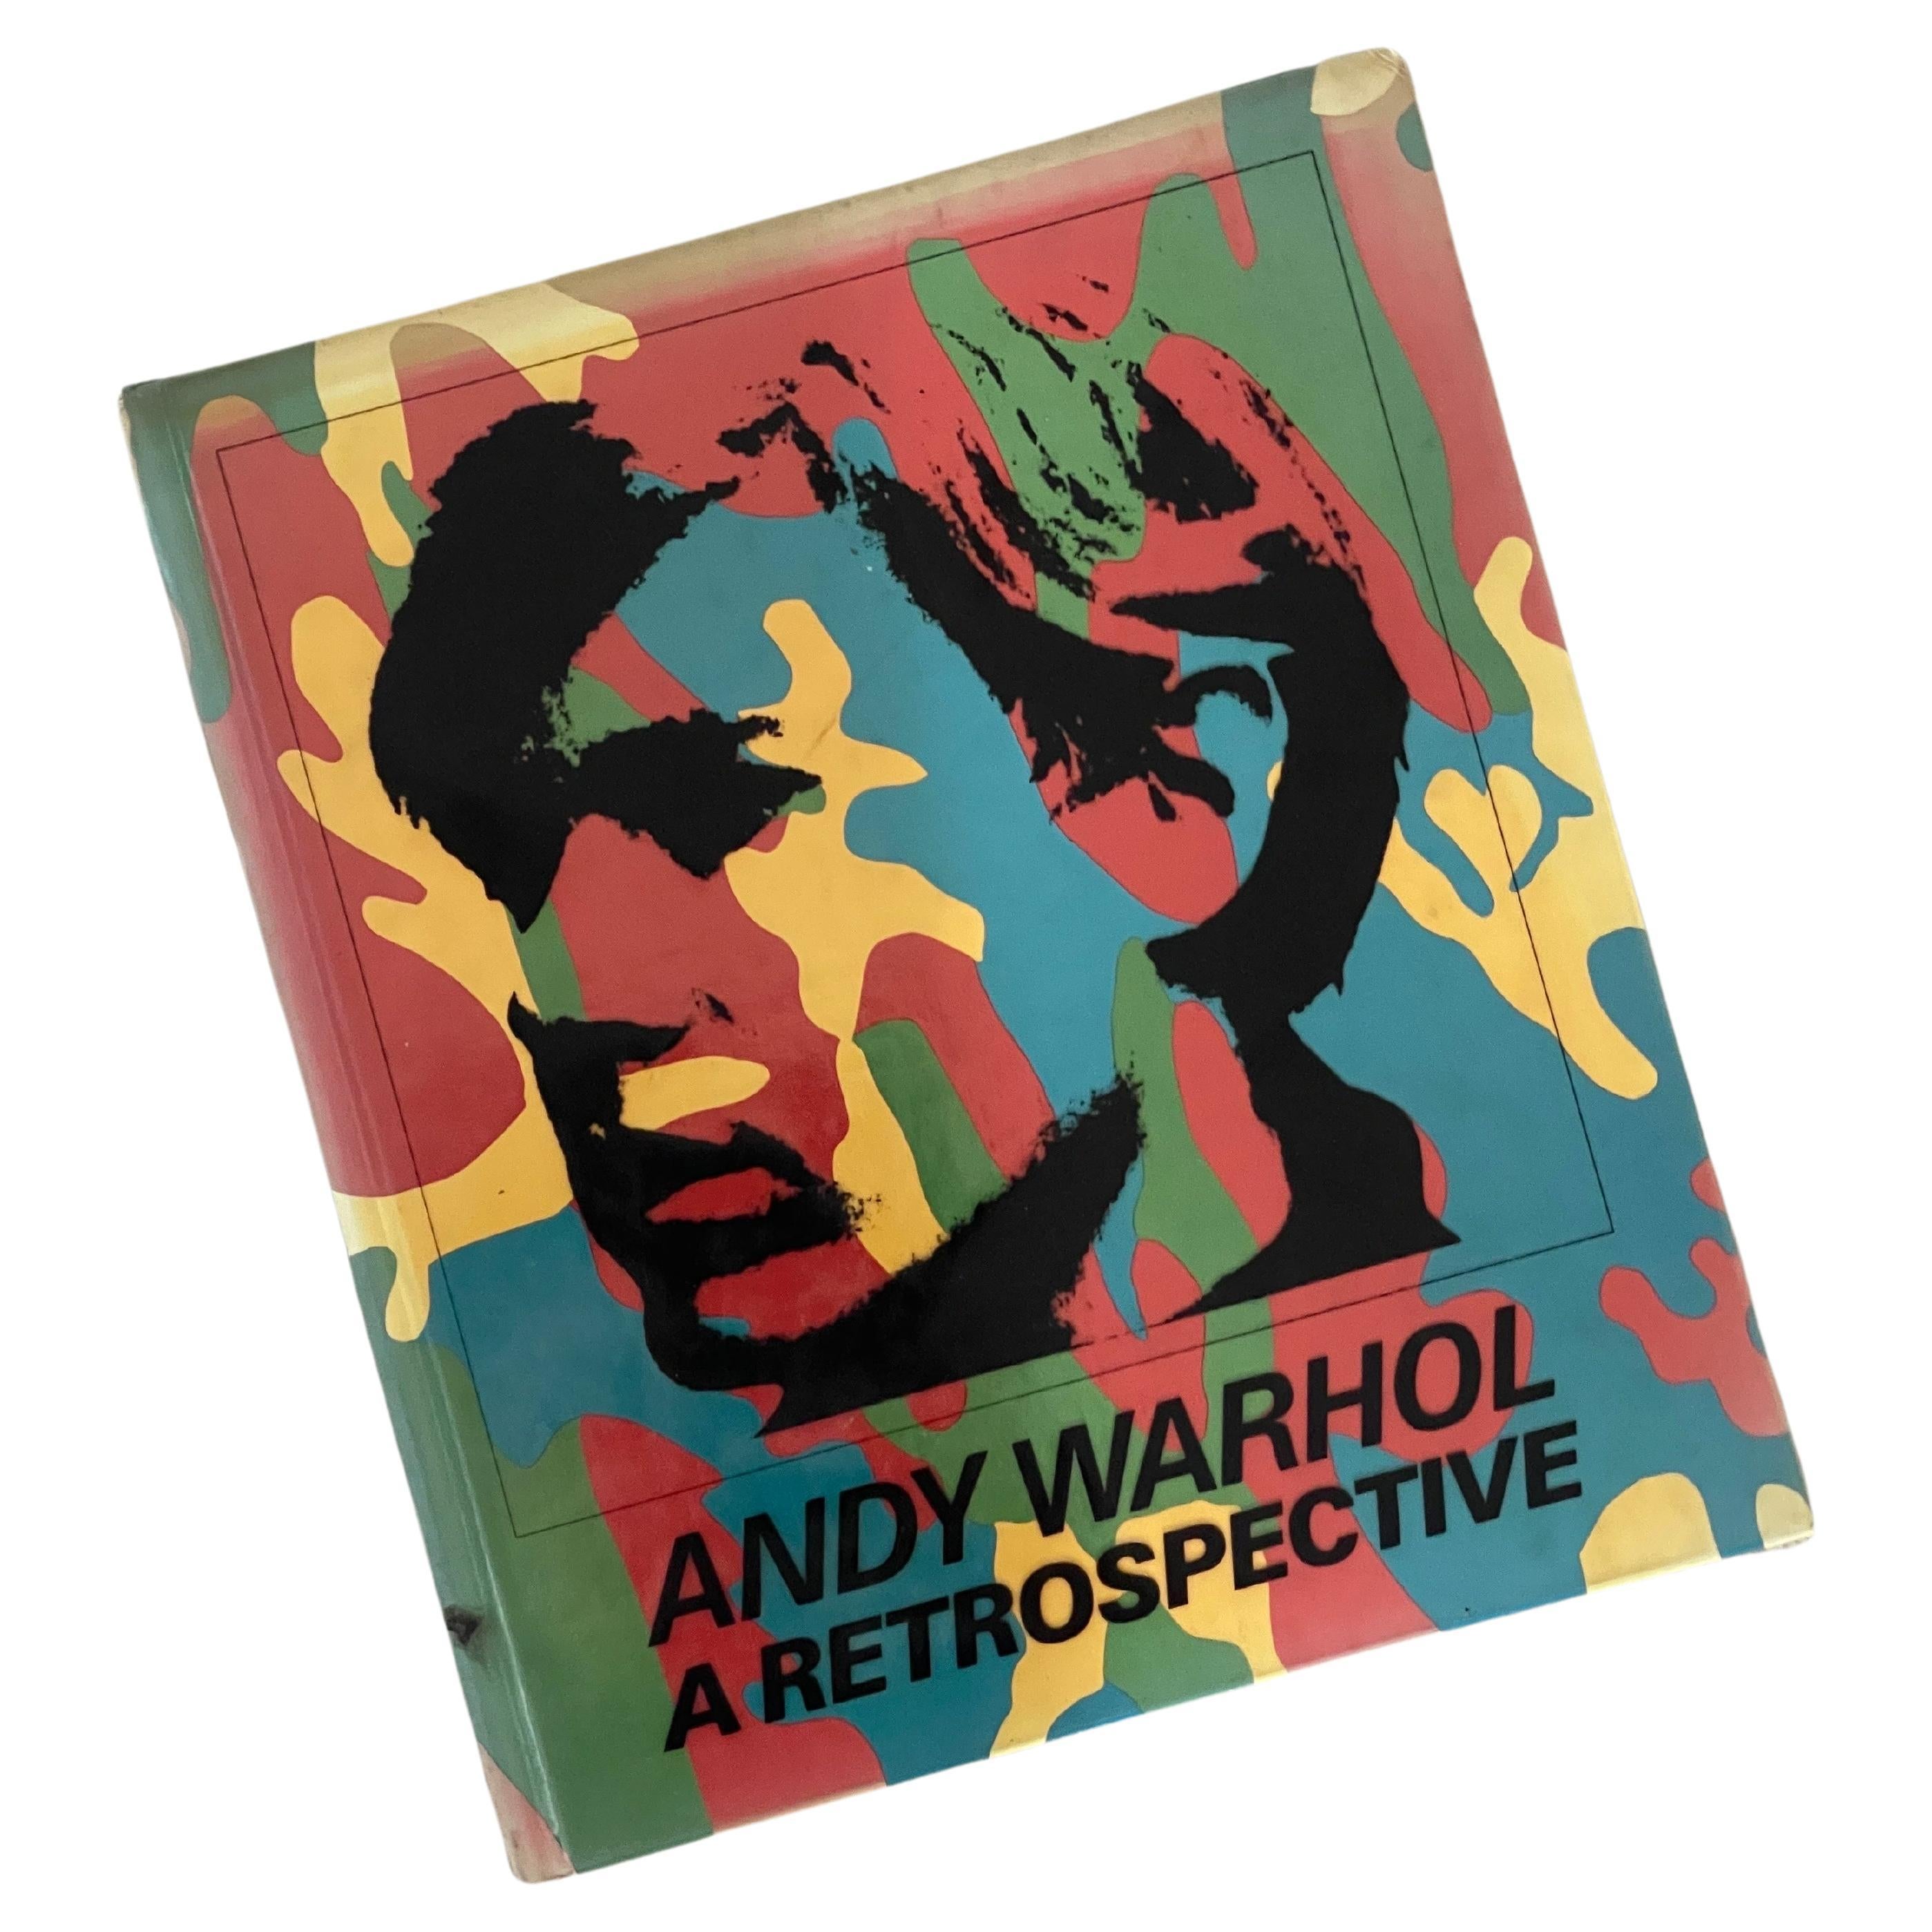 "Andy Warhol A Retrospective" Art Book MOMA First Edition 1989 For Sale